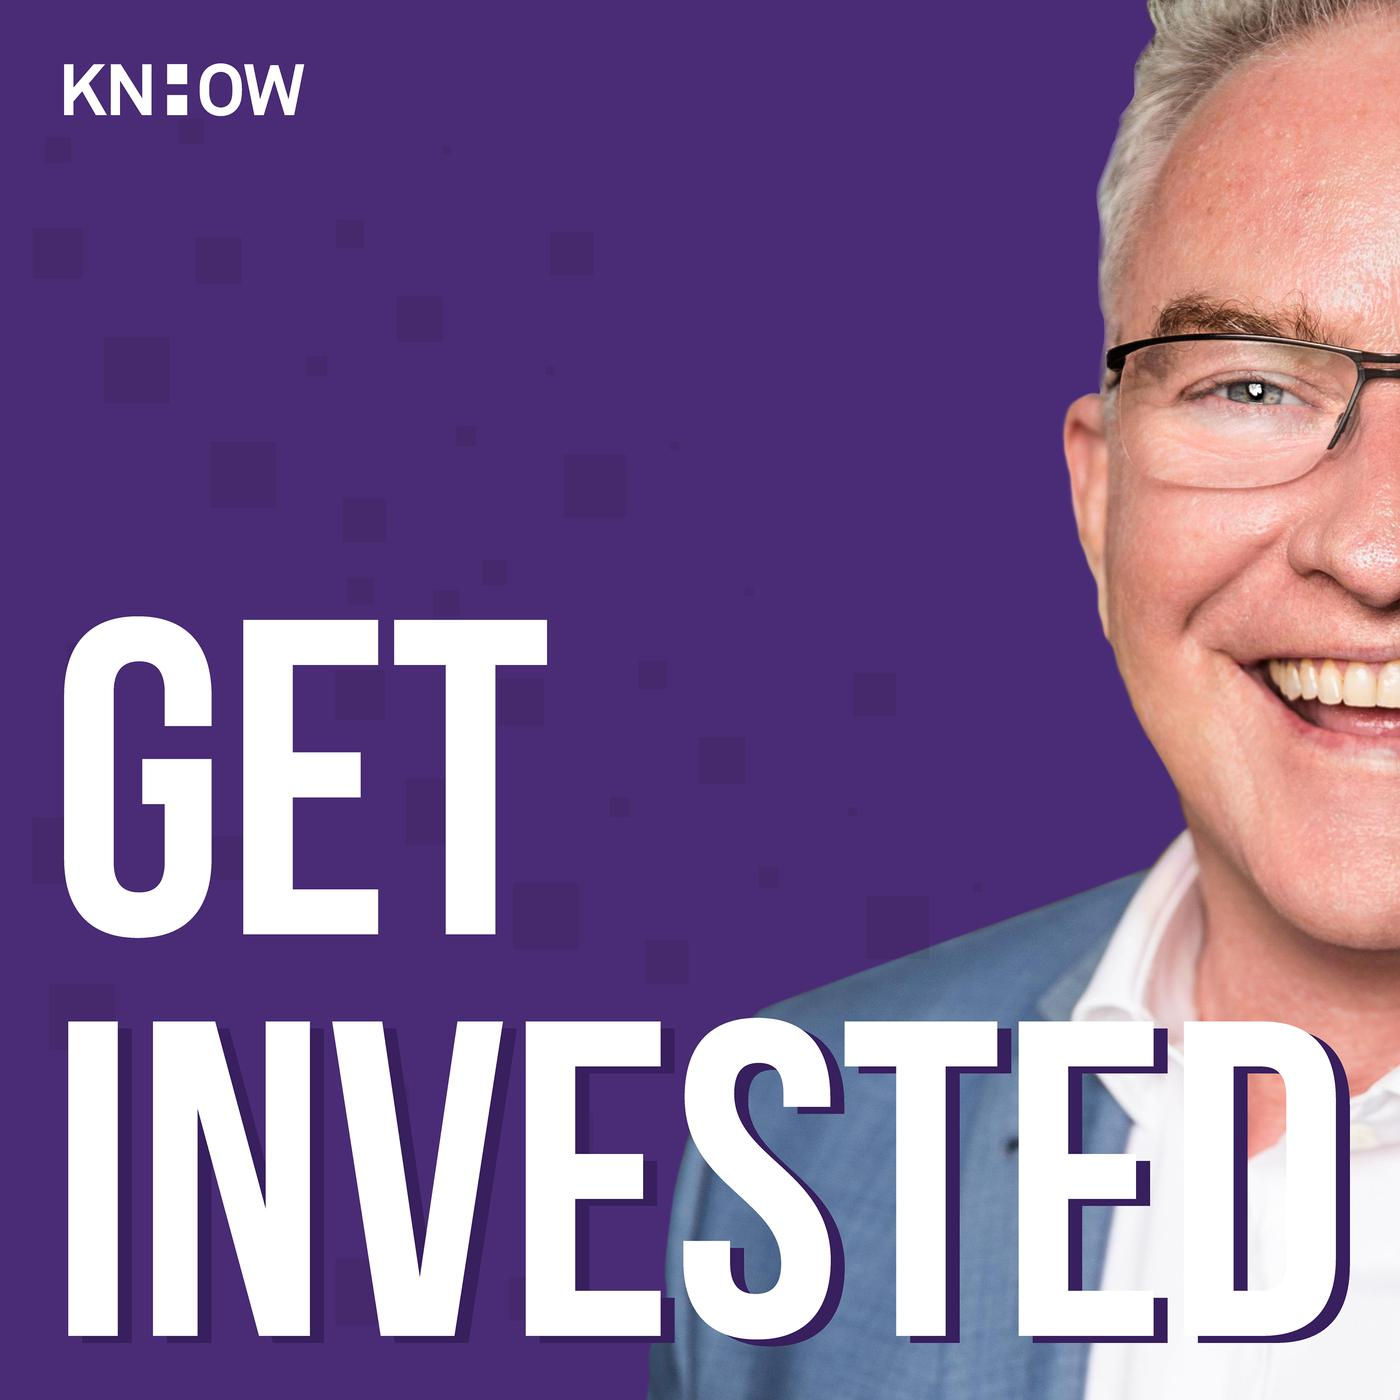 Get Invested: Part 1 - Sharyn Burgess on financing your future